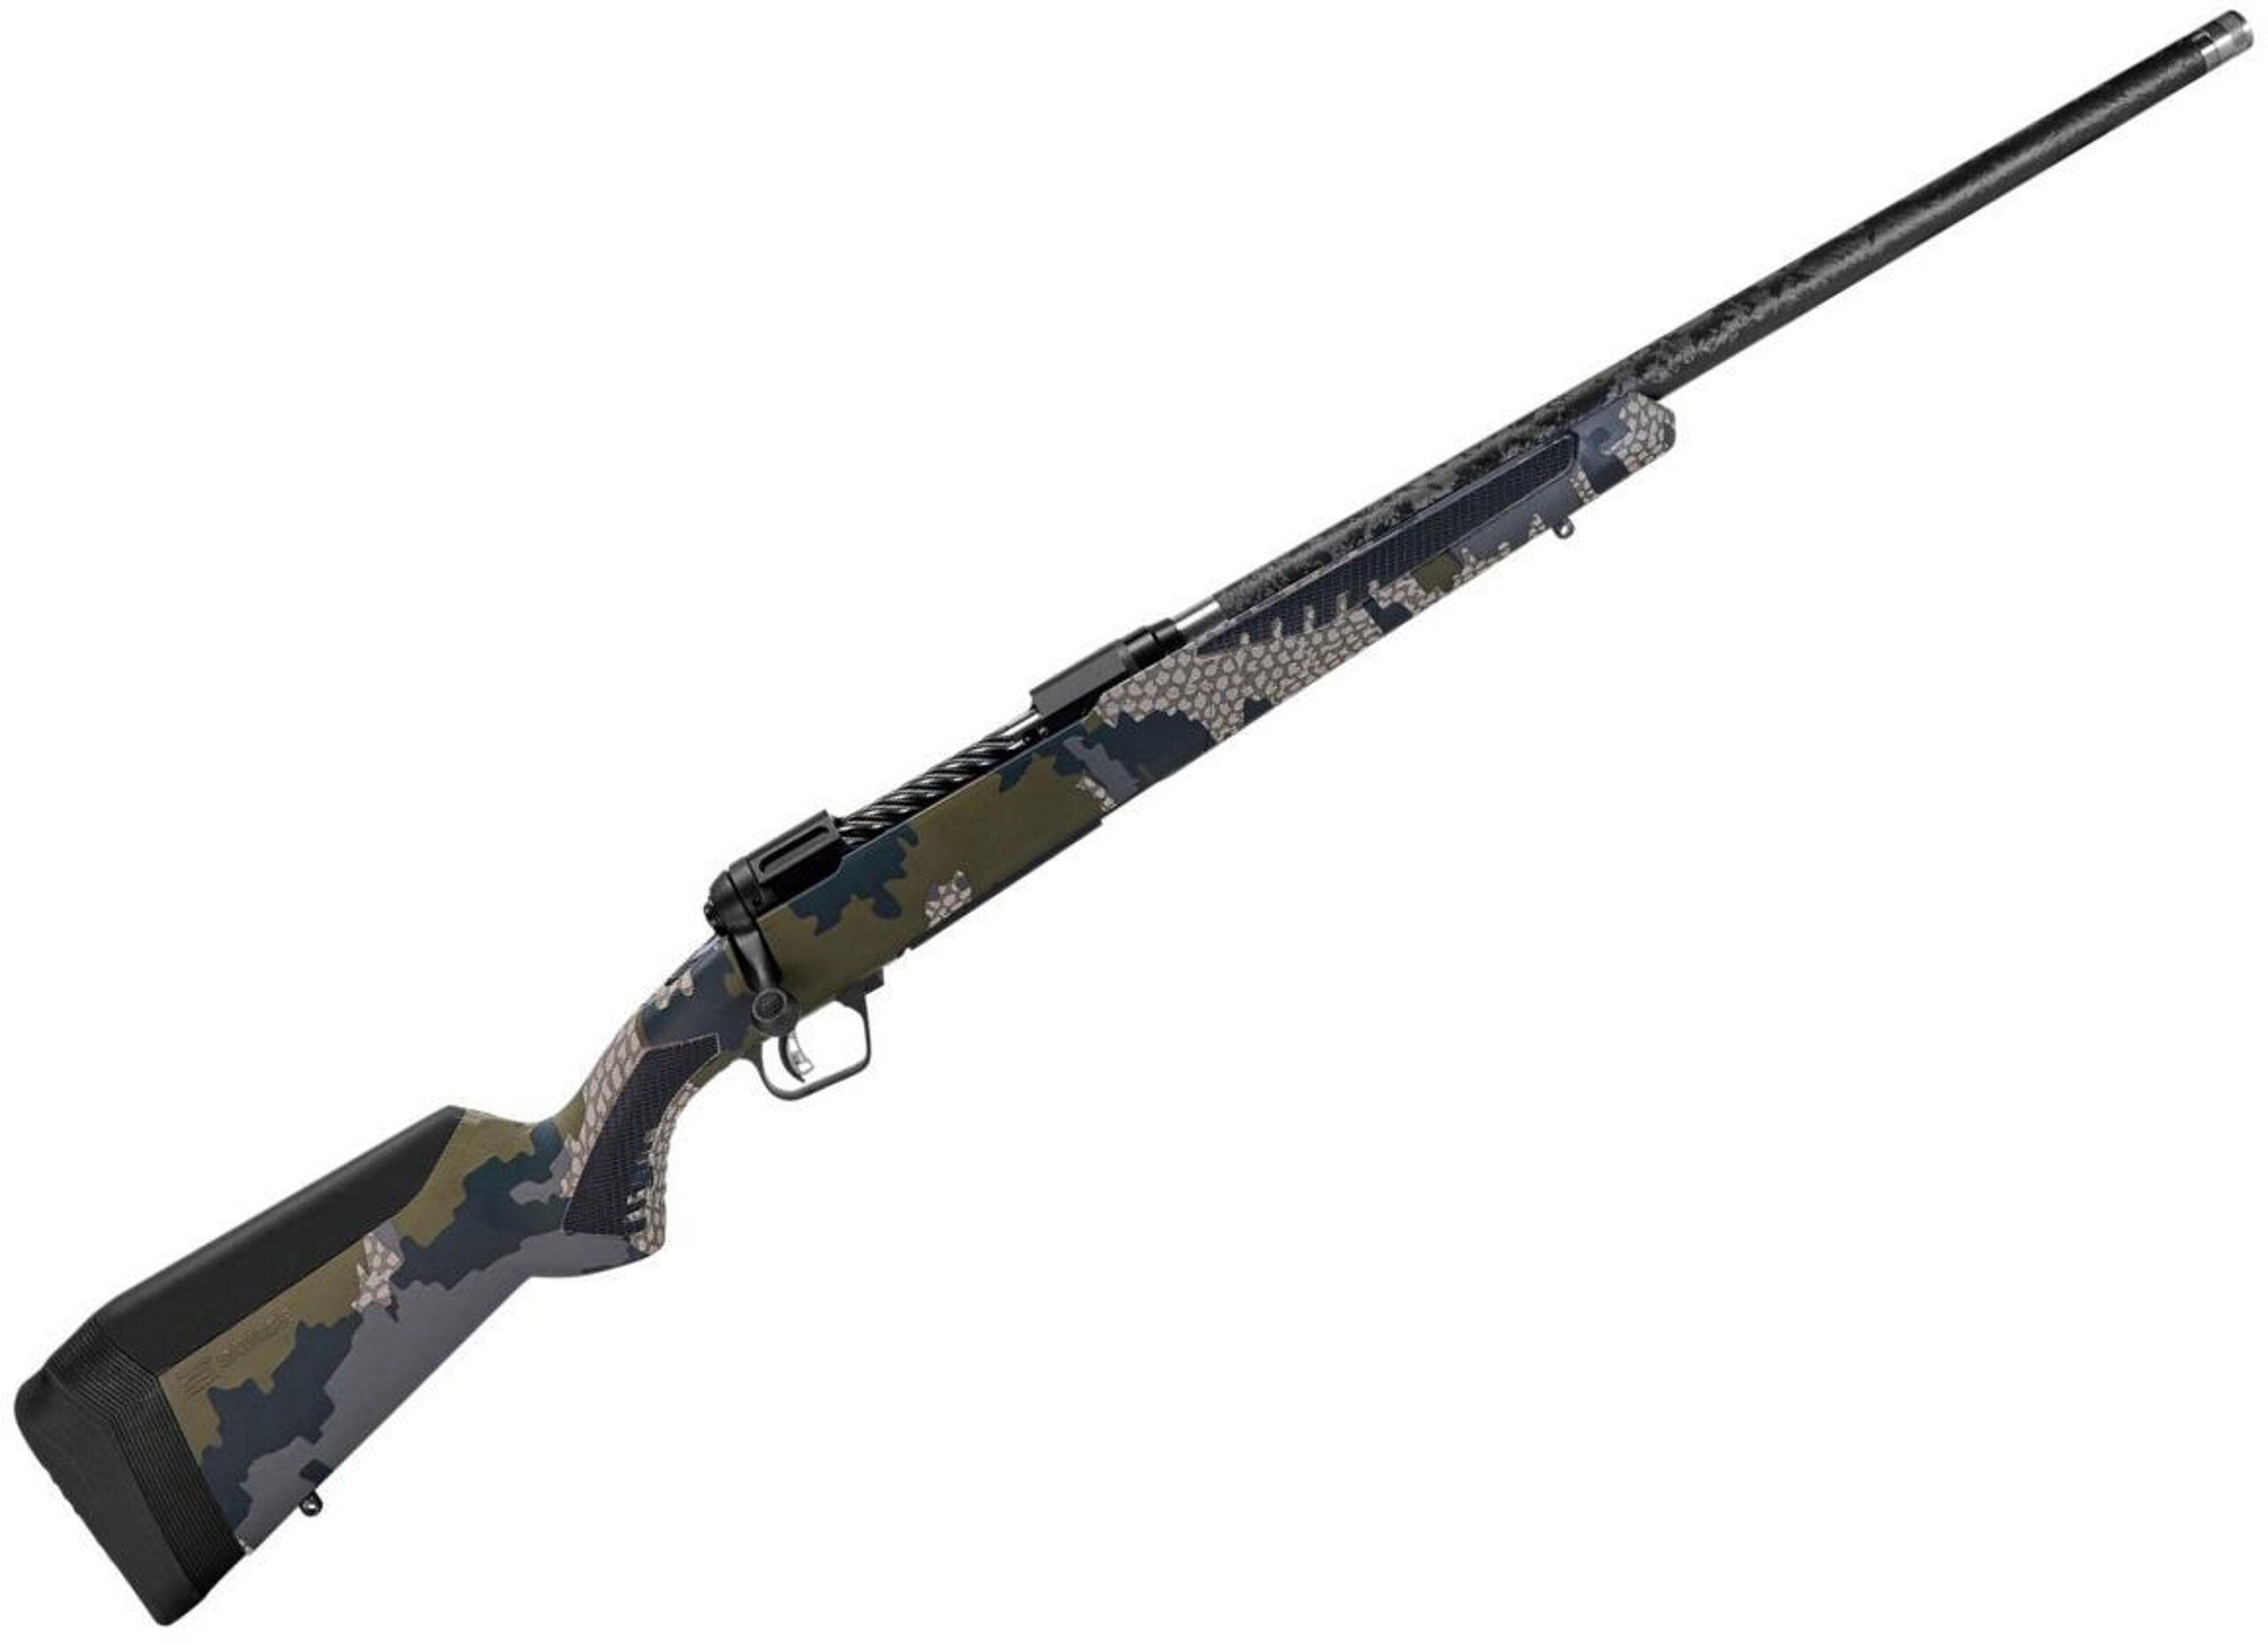 Savage 58017 110 Ultralite Camo 308 Win 22 in Black Carbon Fiber BBL, Camouflage Savage Woodland Camo Synthetic Stock, 0685-2635